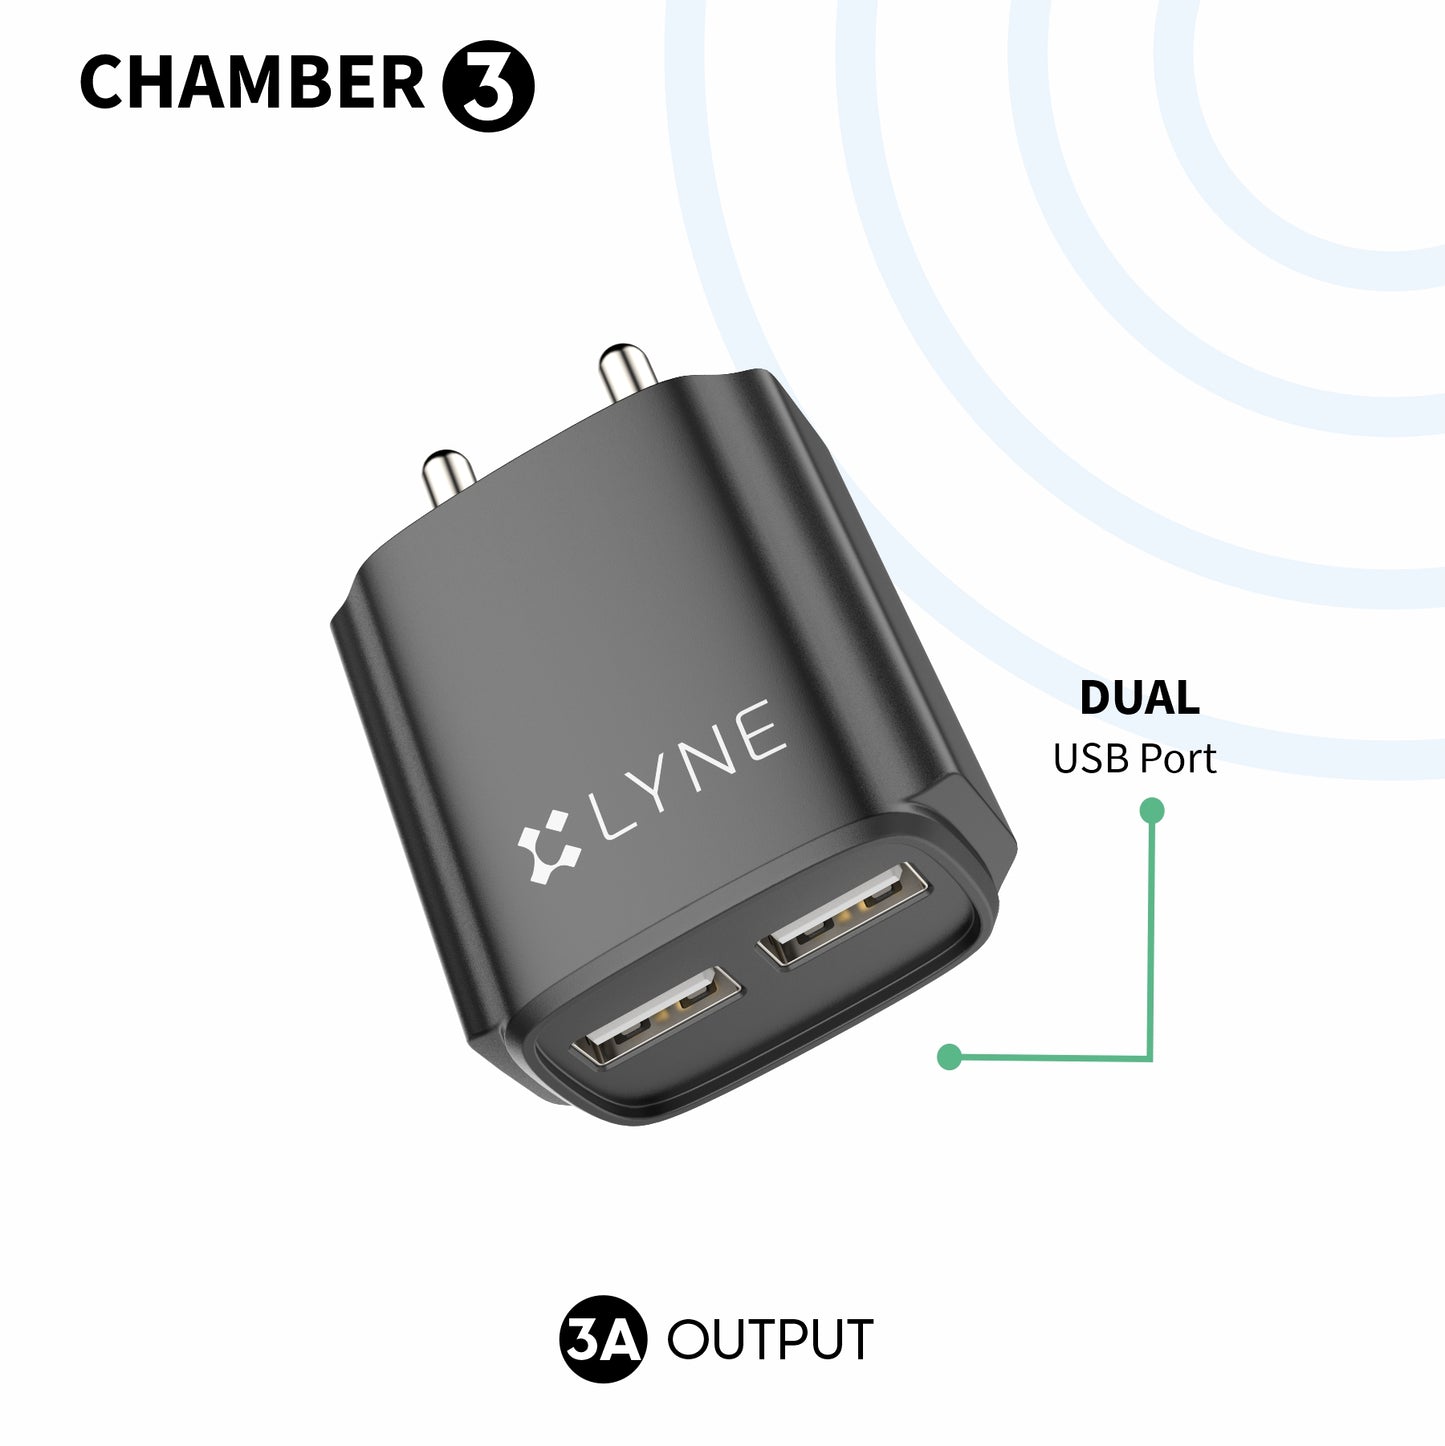 LYNE Chamber 3 3A Output, Dual USB Port with Cable